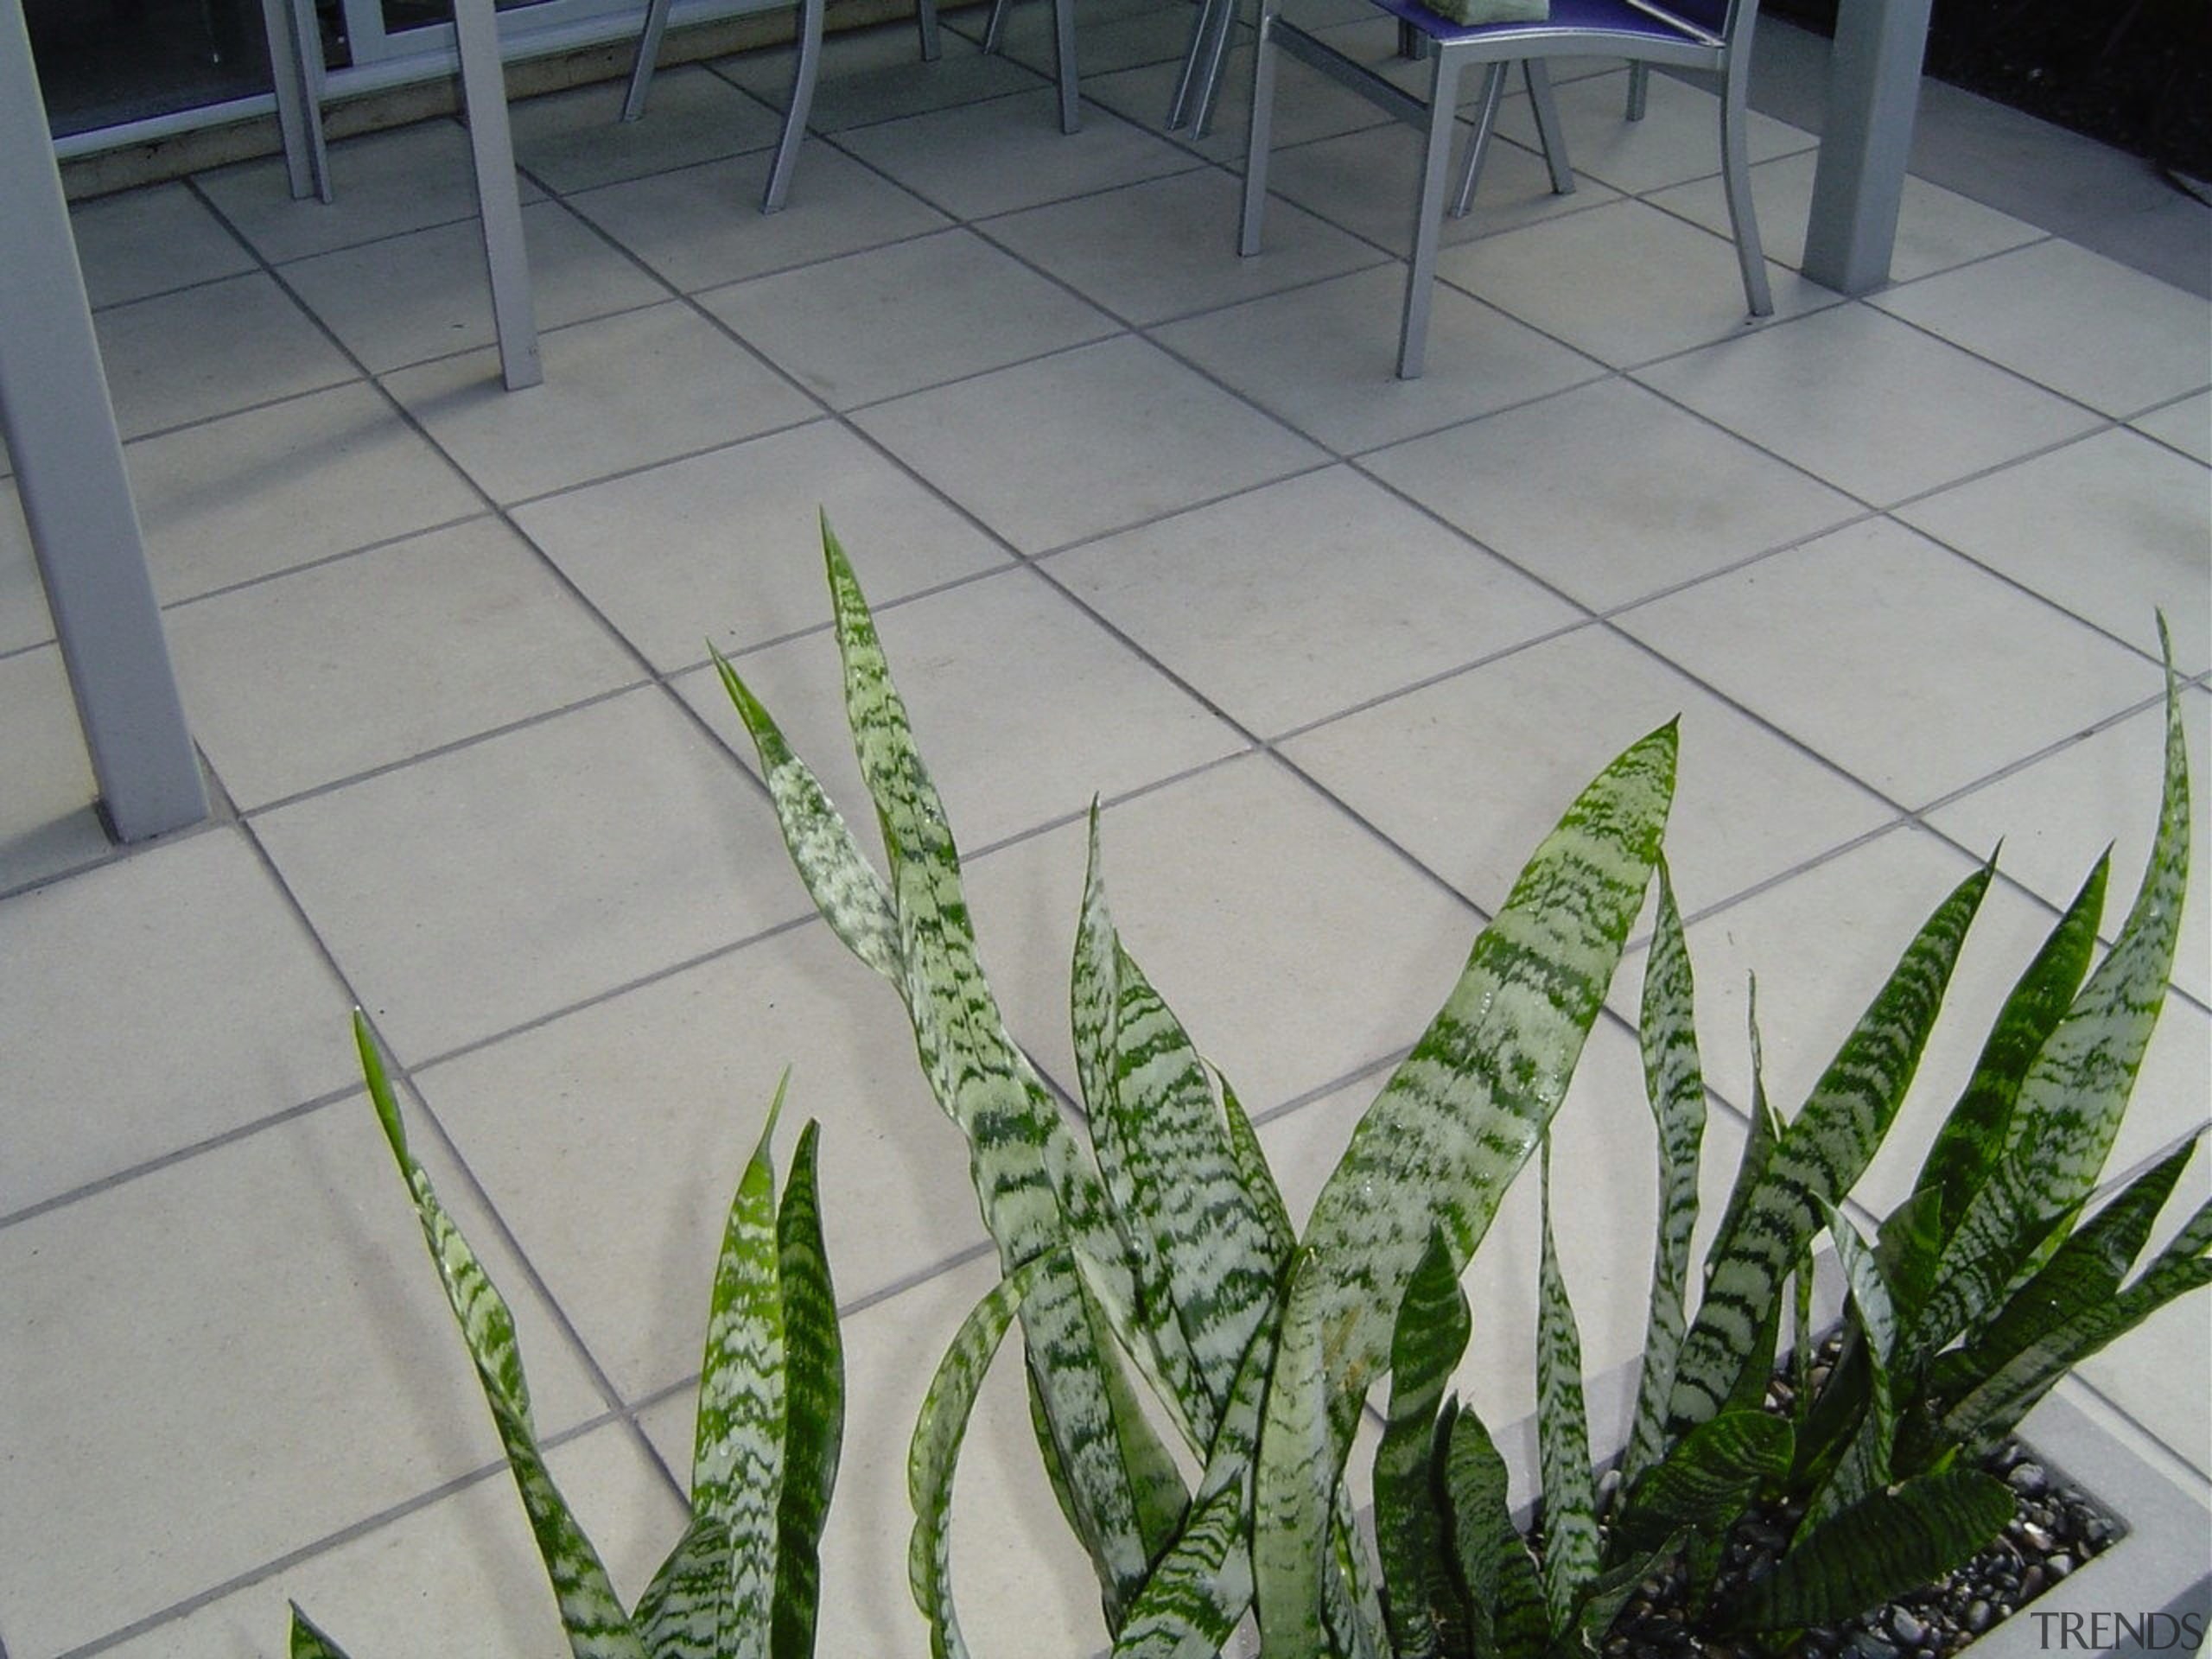 A view of some paving. - A view grass, leaf, plant, gray